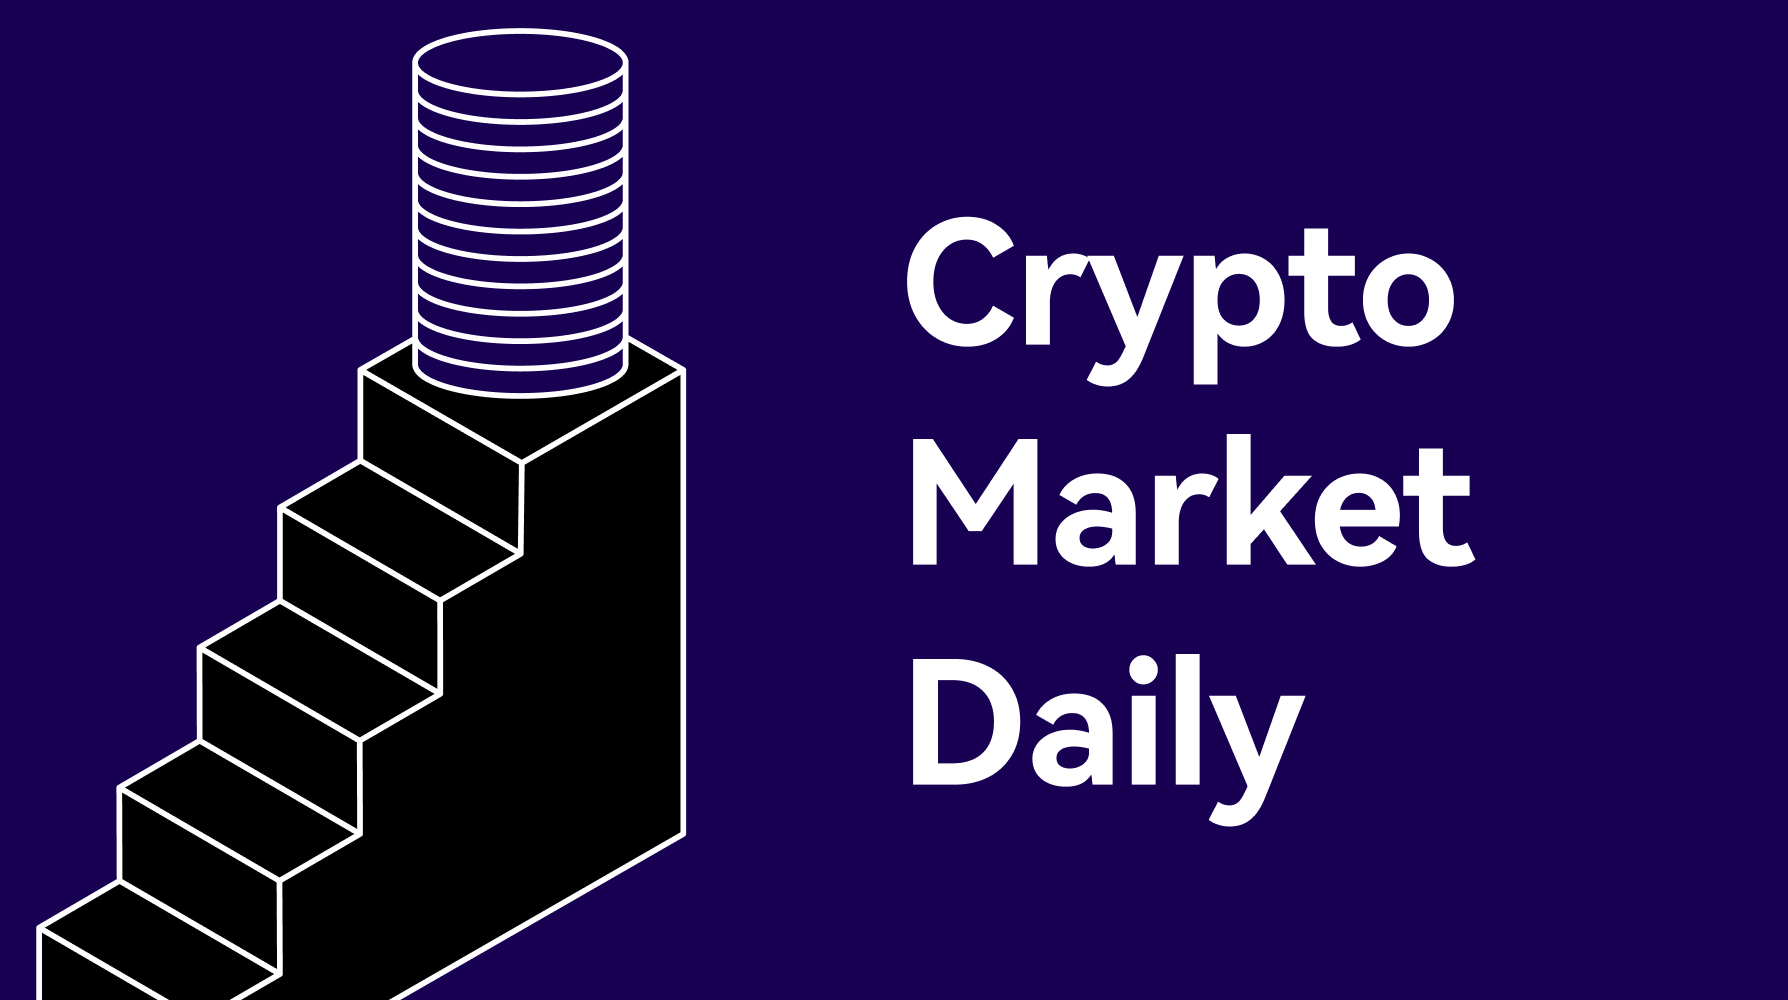 Crypto markets sell off to start week